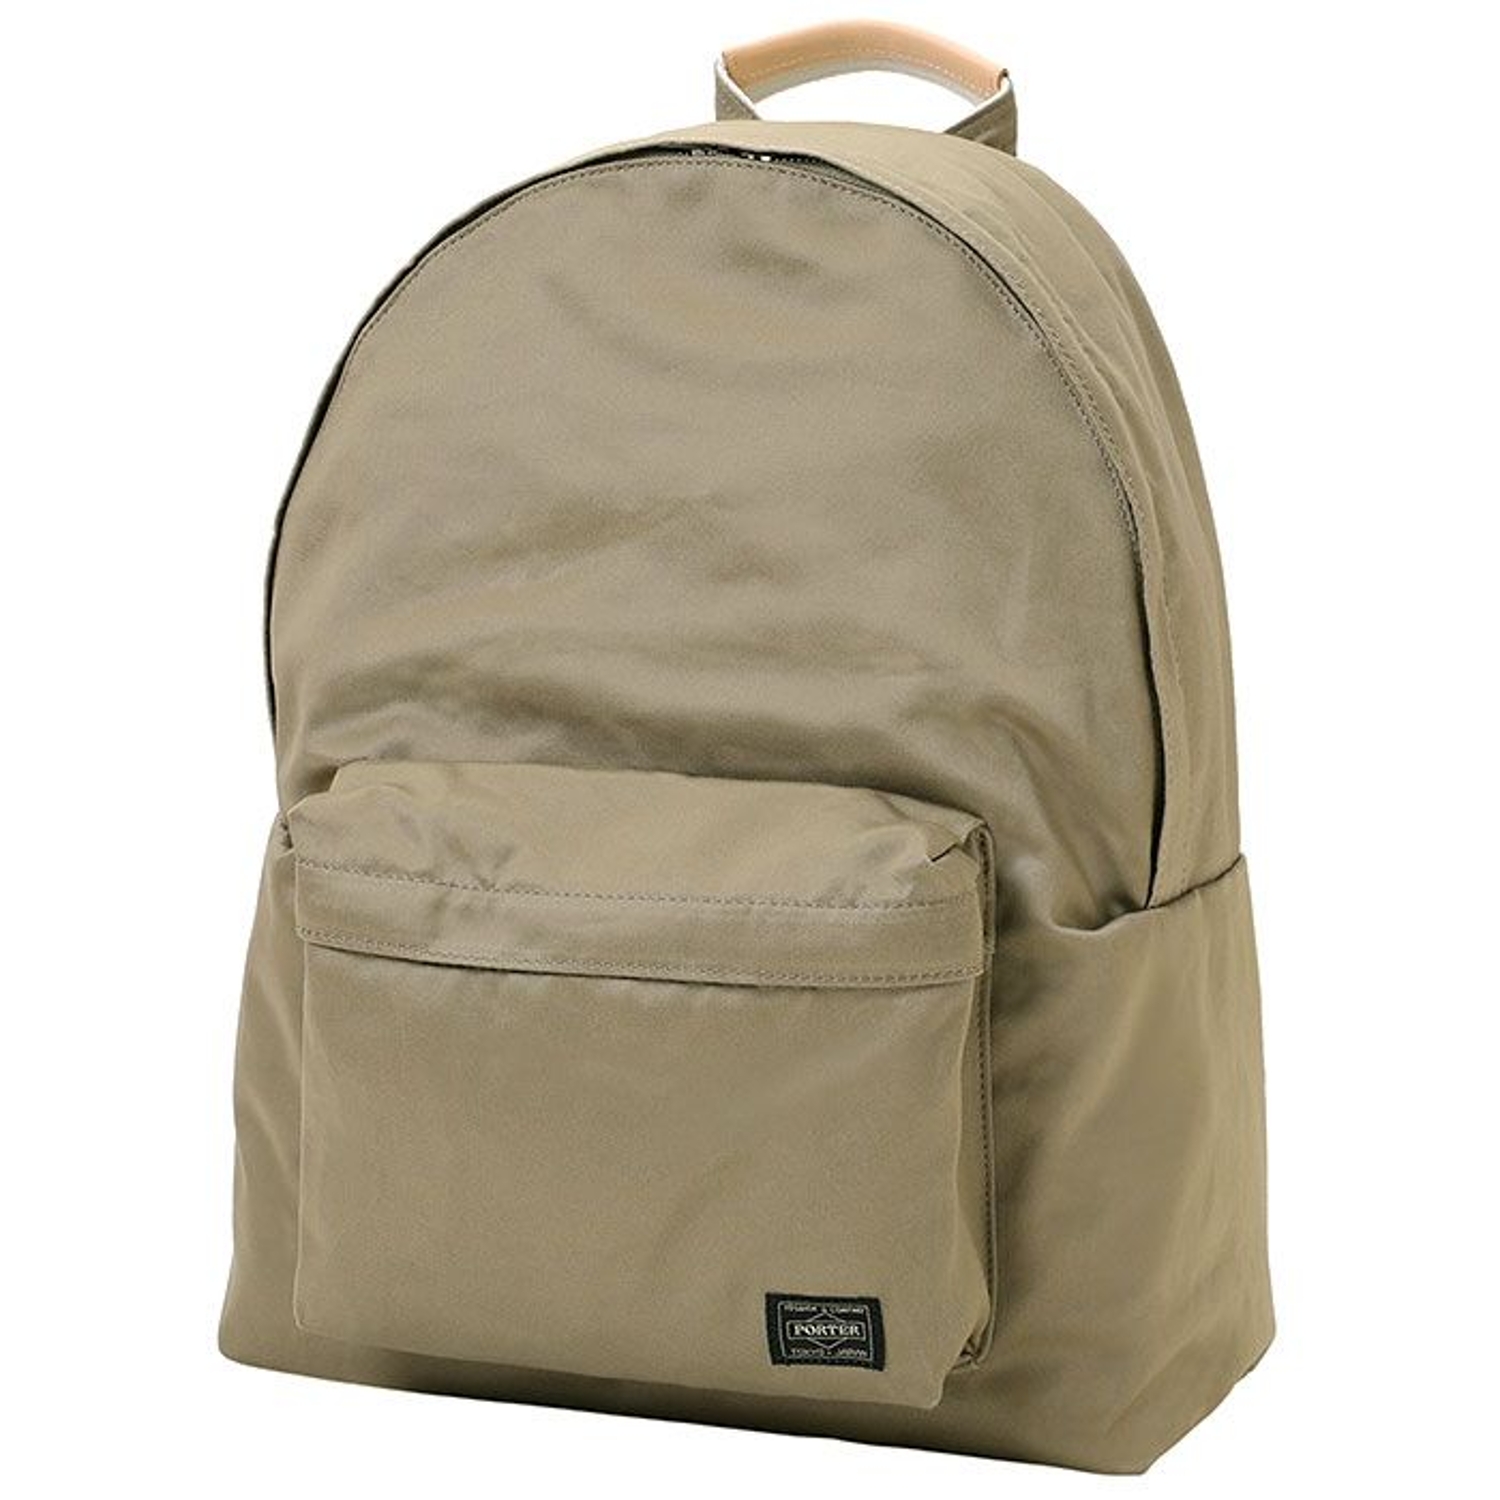 PORTER / WEAPON / DAYPACK (104698)